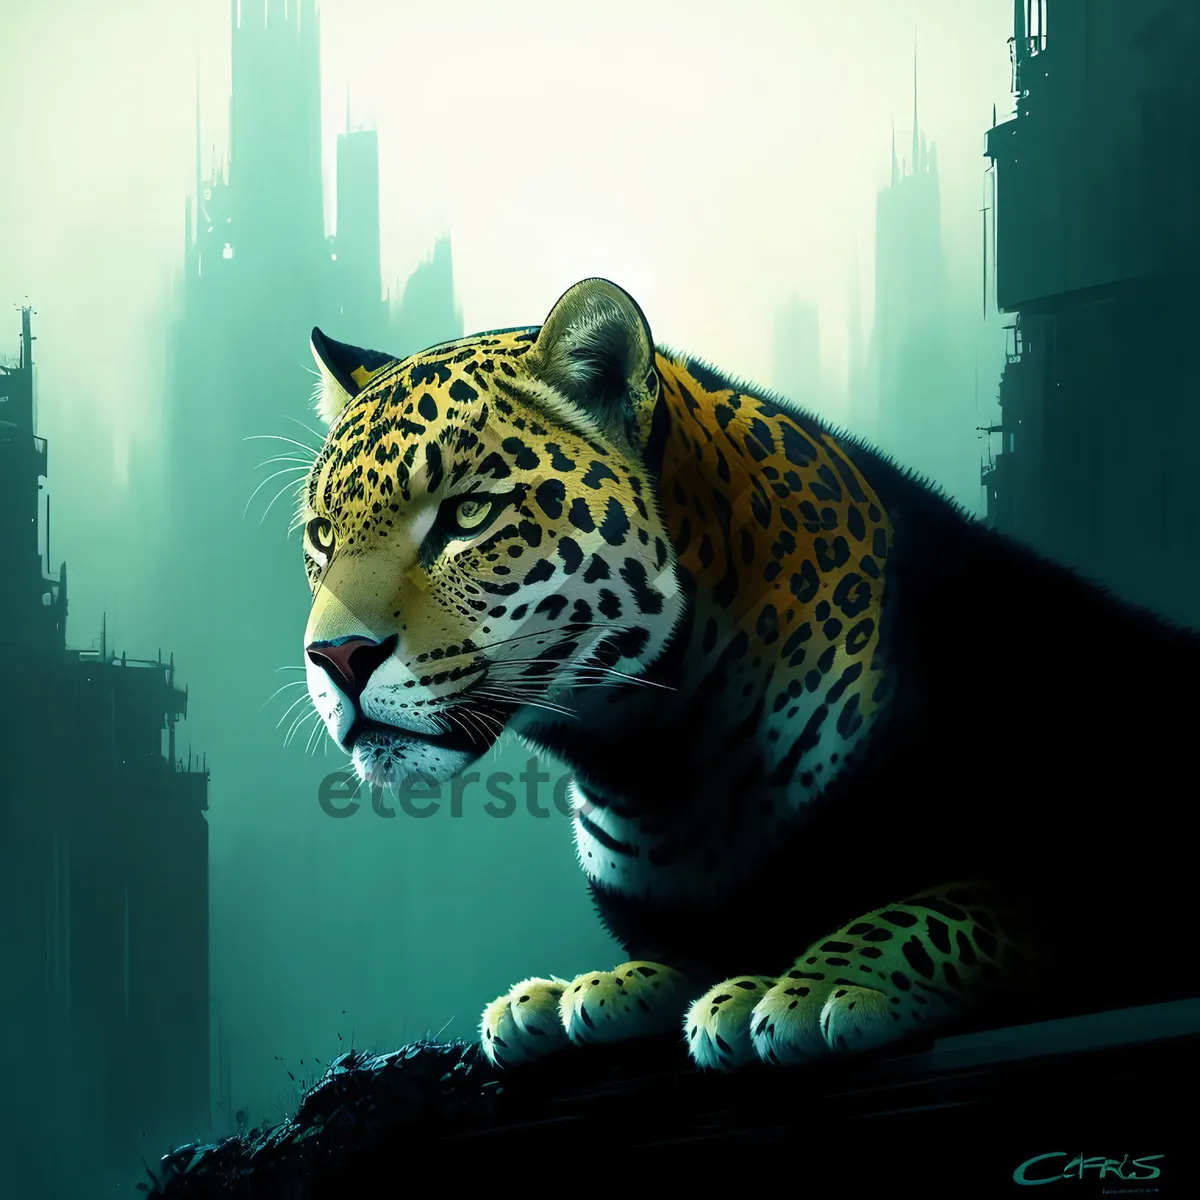 Picture of Majestic Striped Jaguar Gazing Intently